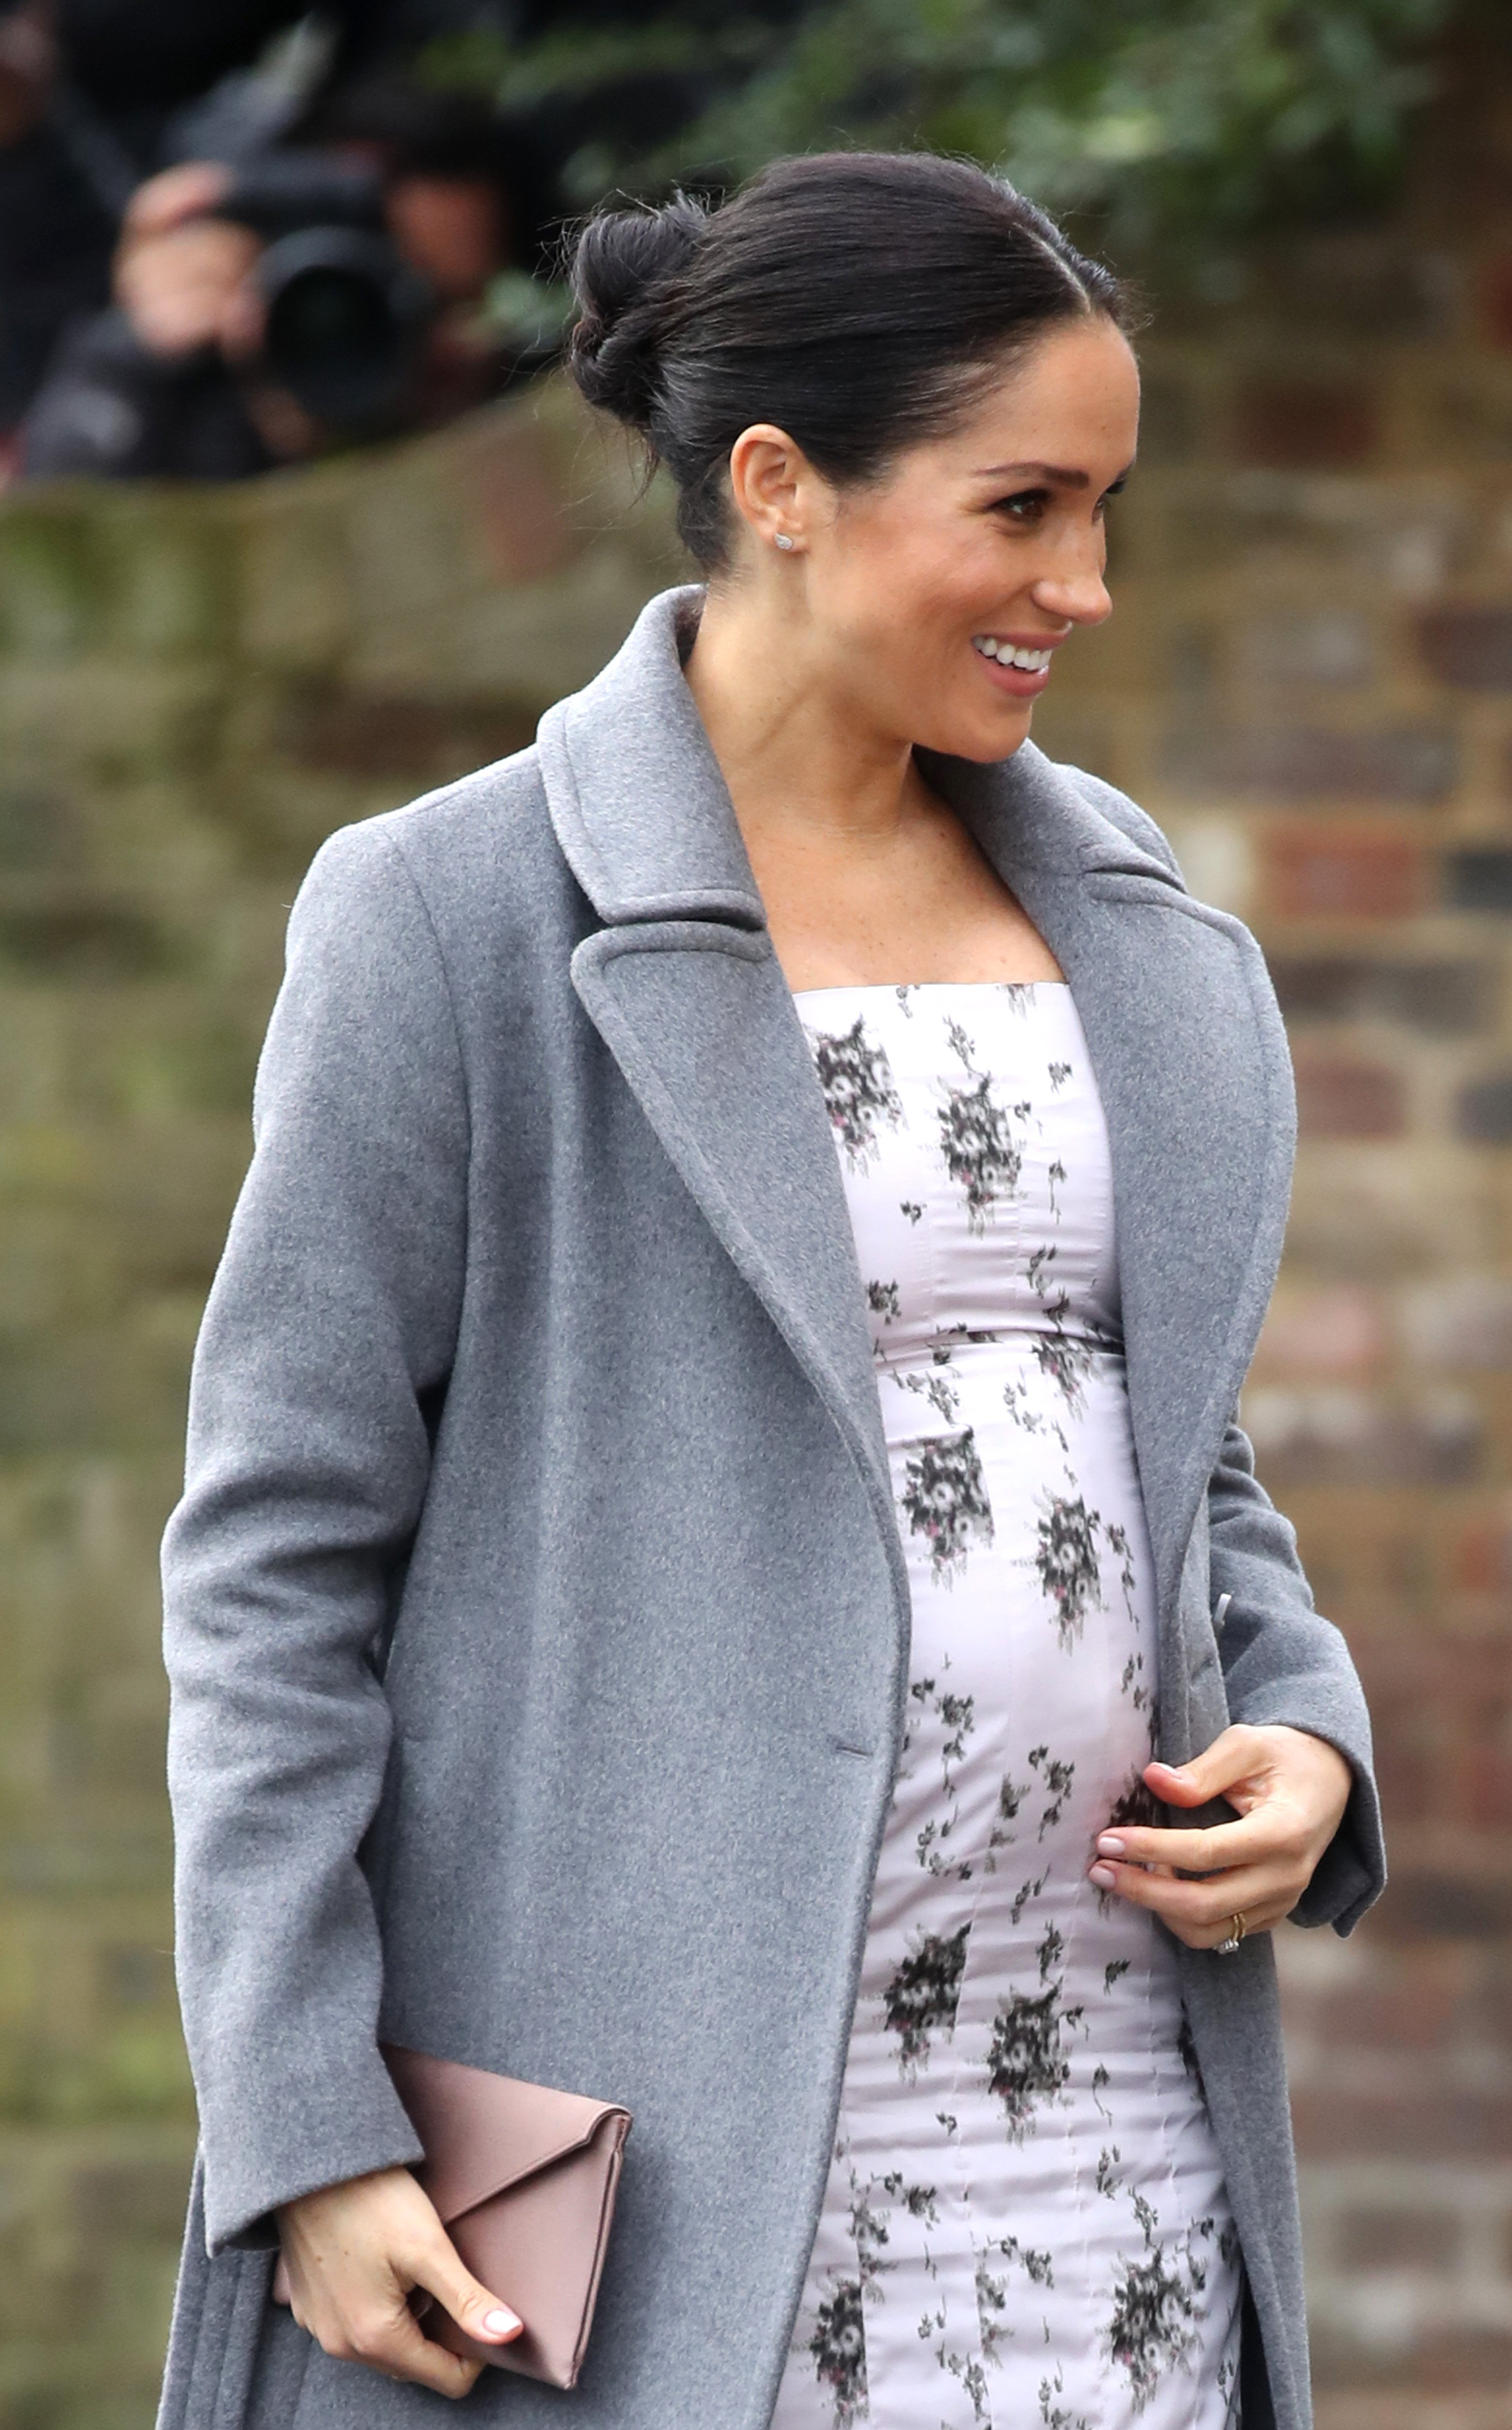 Meghan, Duchess of Sussex arrives for a visit to the Royal Variety Charity's at Brinsworth House on December 18, 2018, in Twickenham, England. | Source: Getty Images.